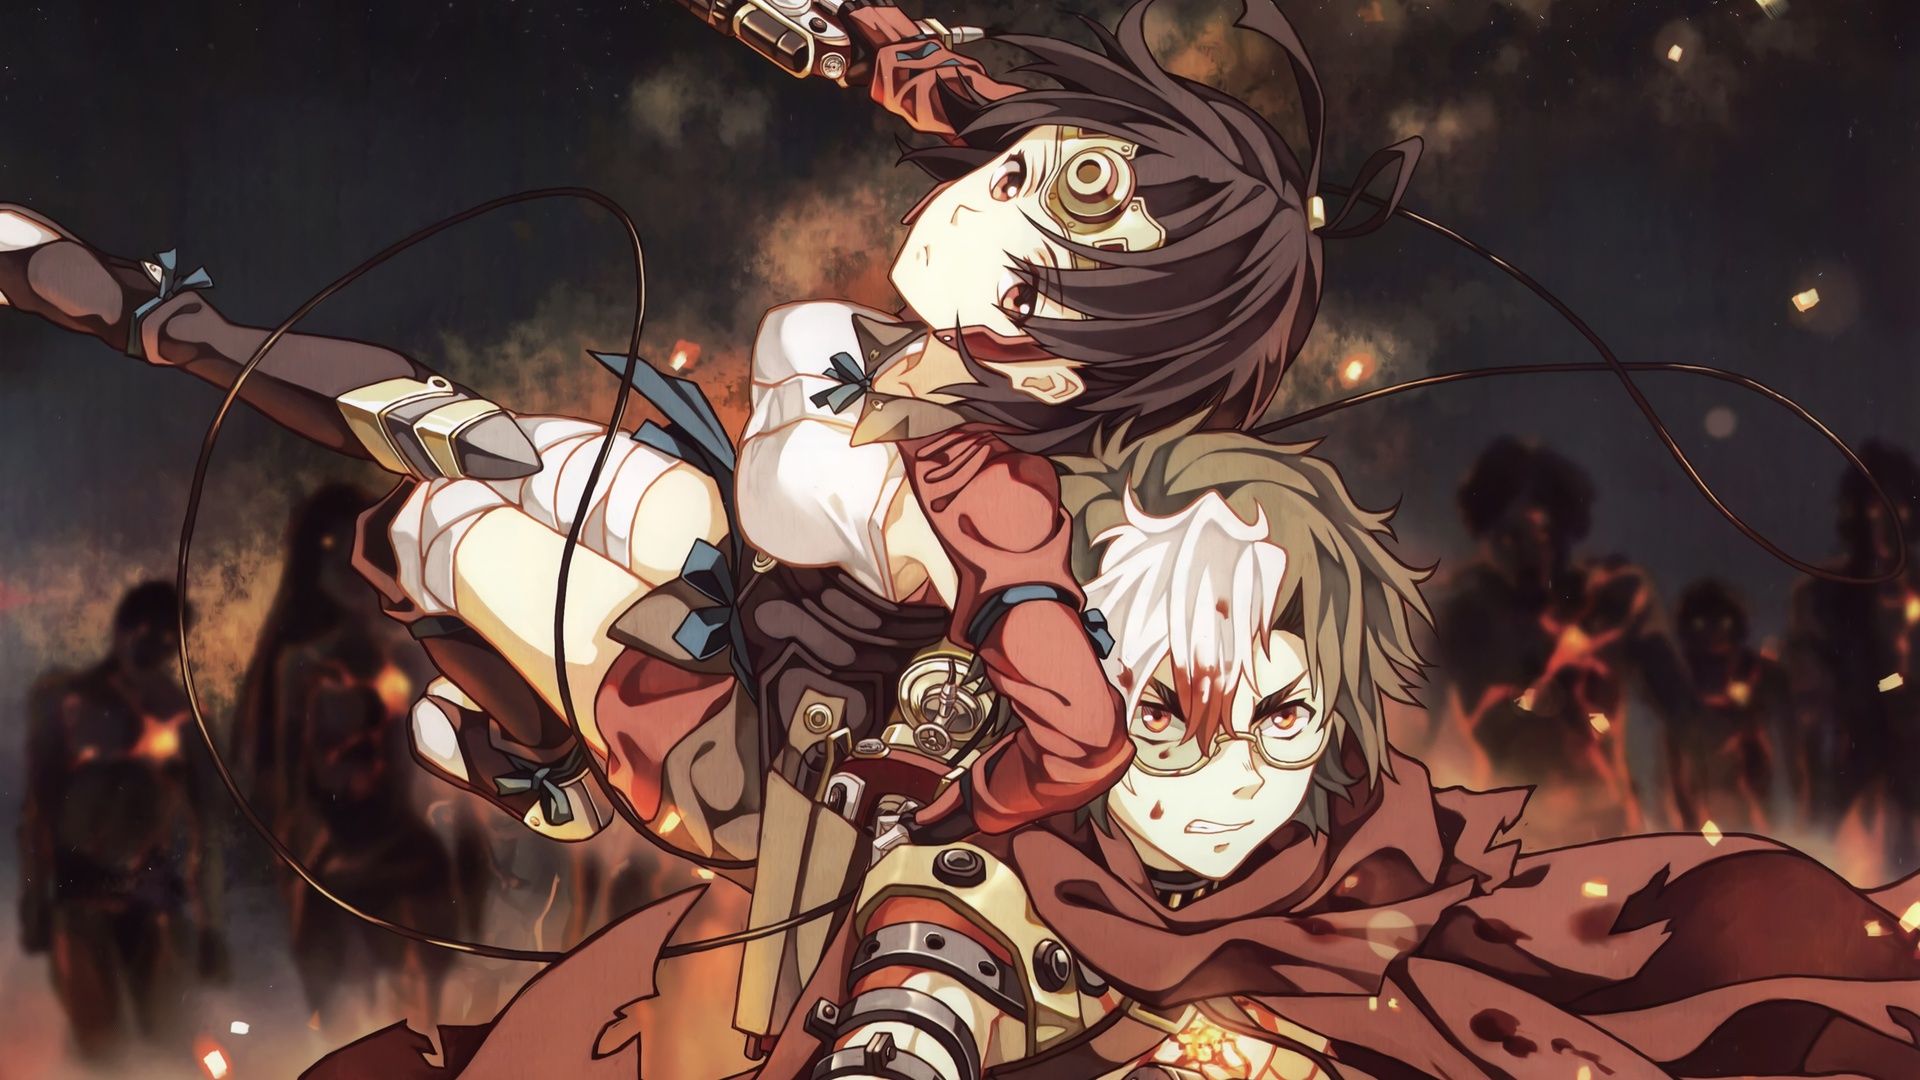 Kabaneri of the Iron Fortress: The Battle of Unato background